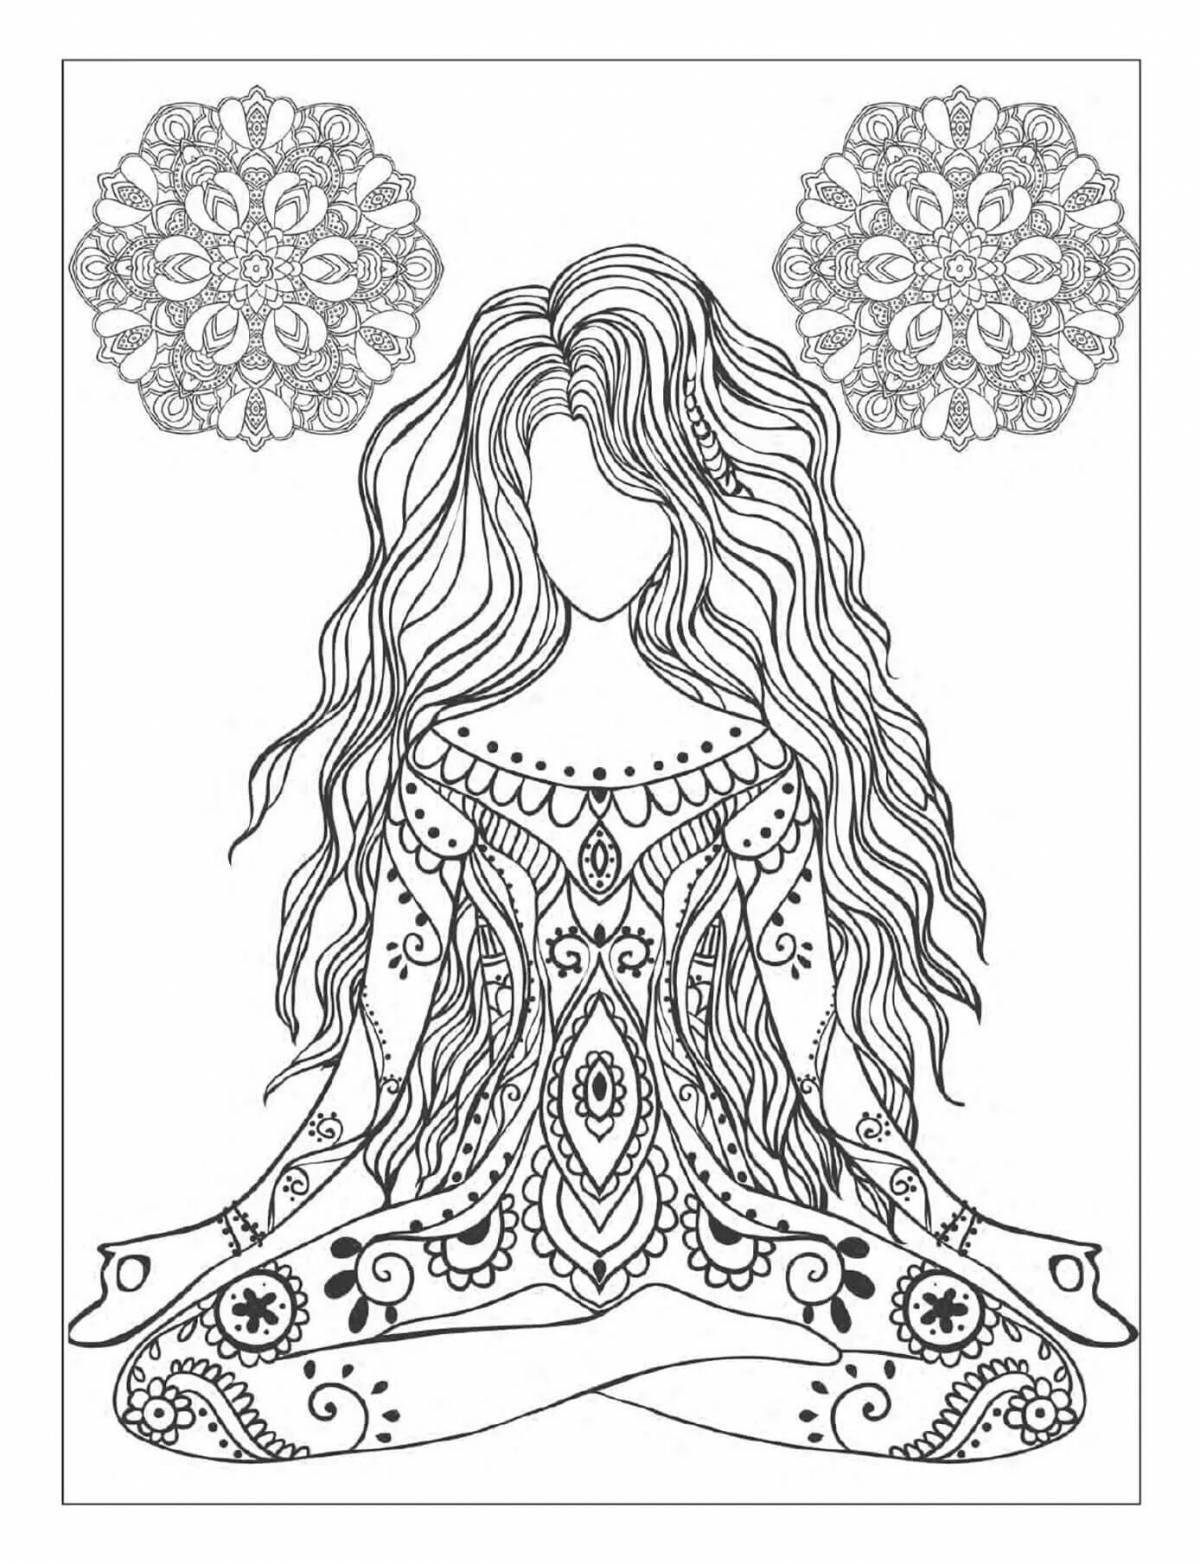 Soothing meditation coloring book